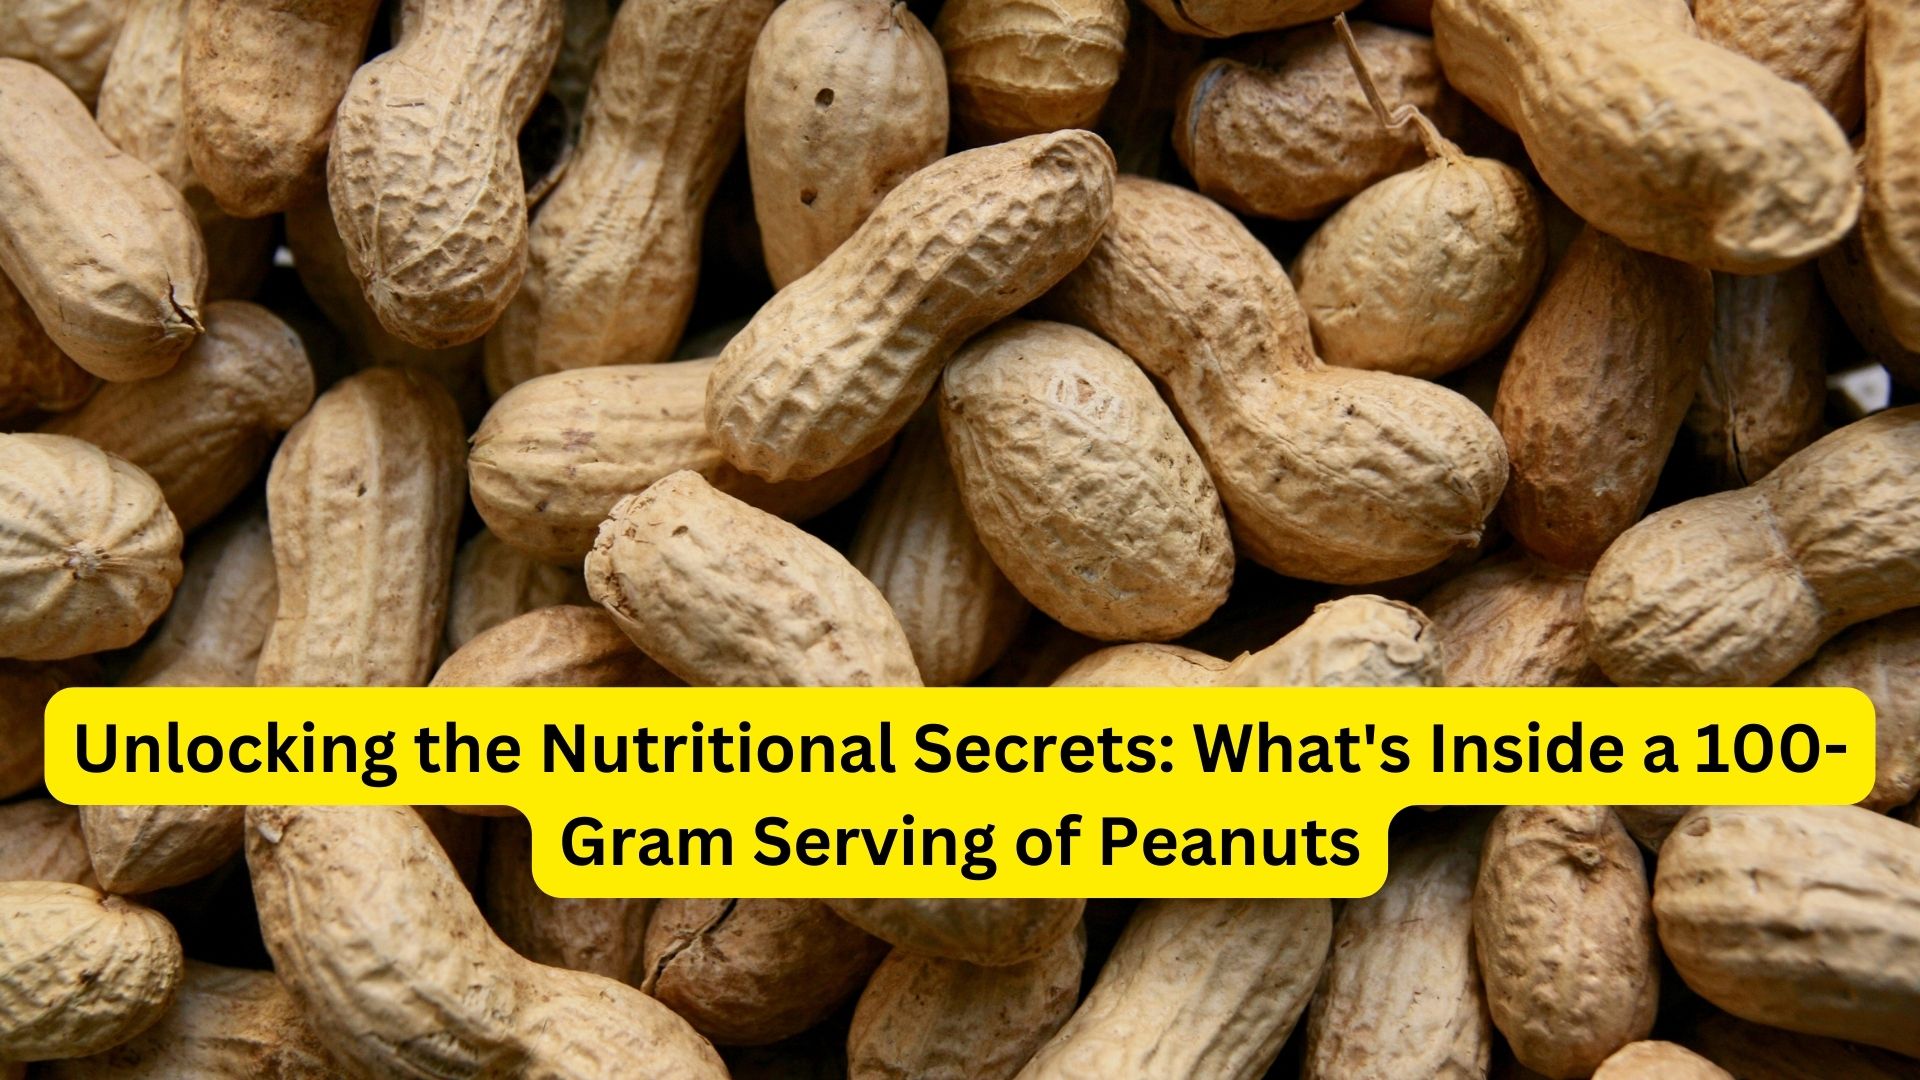 Unlocking the Nutritional Secrets: What's Inside a 100-Gram Serving of Peanuts